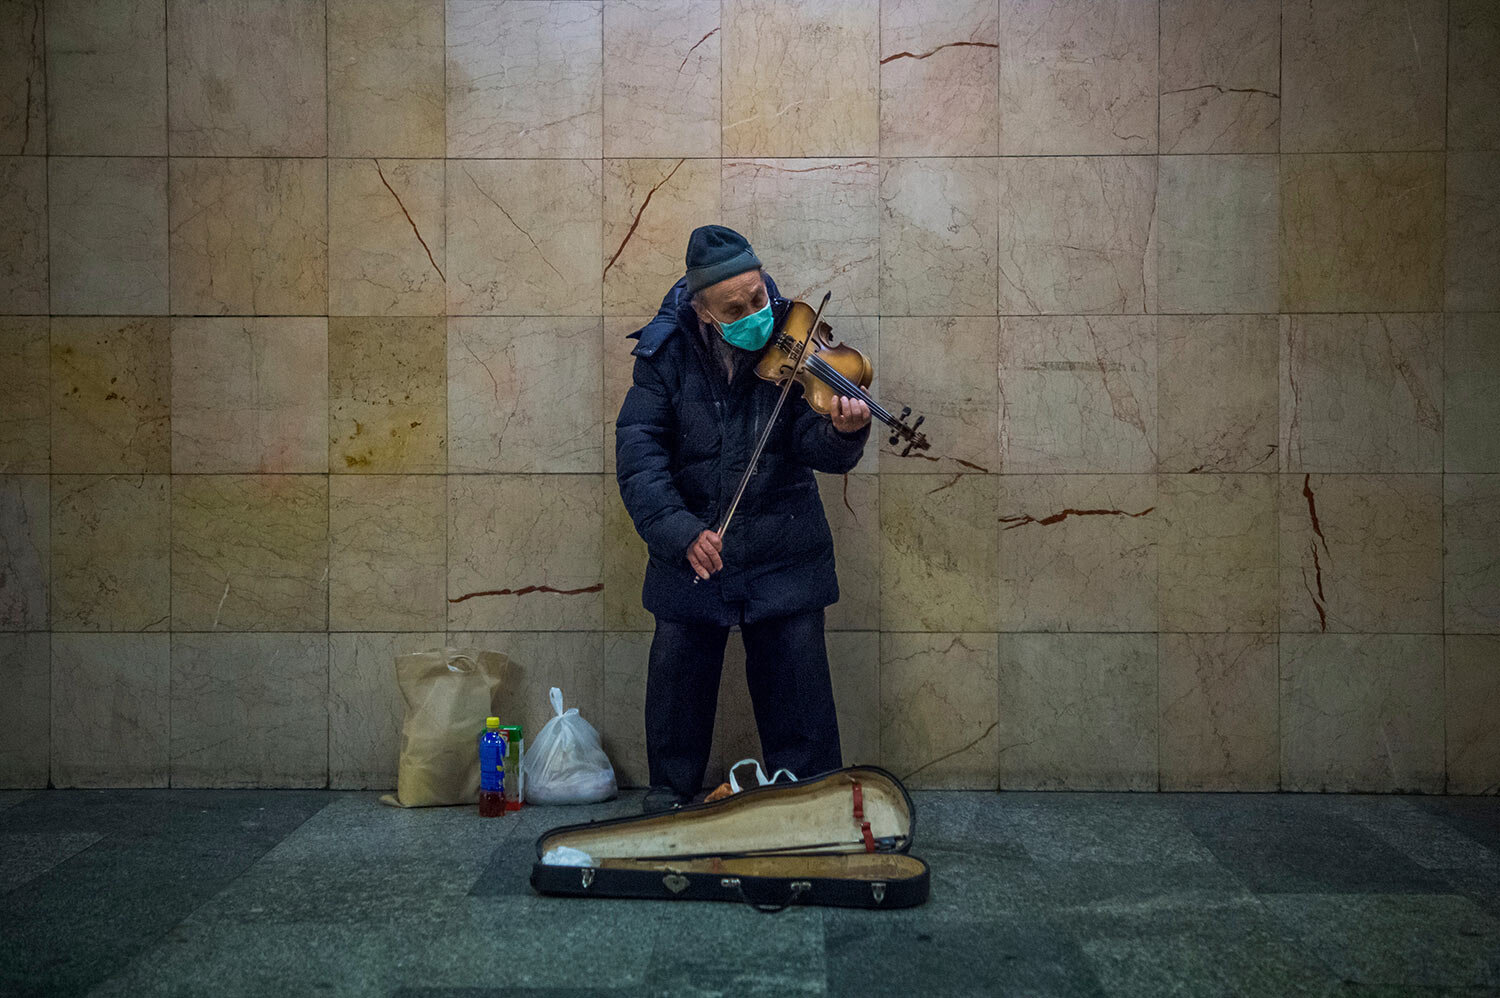  Busker wearing a protective face mask plays the violin in the subway at Nyugati Square during the coronavirus emergency in Budapest, Hungary, March 18, 2020. (Zoltan Balogh/MTI via AP) 